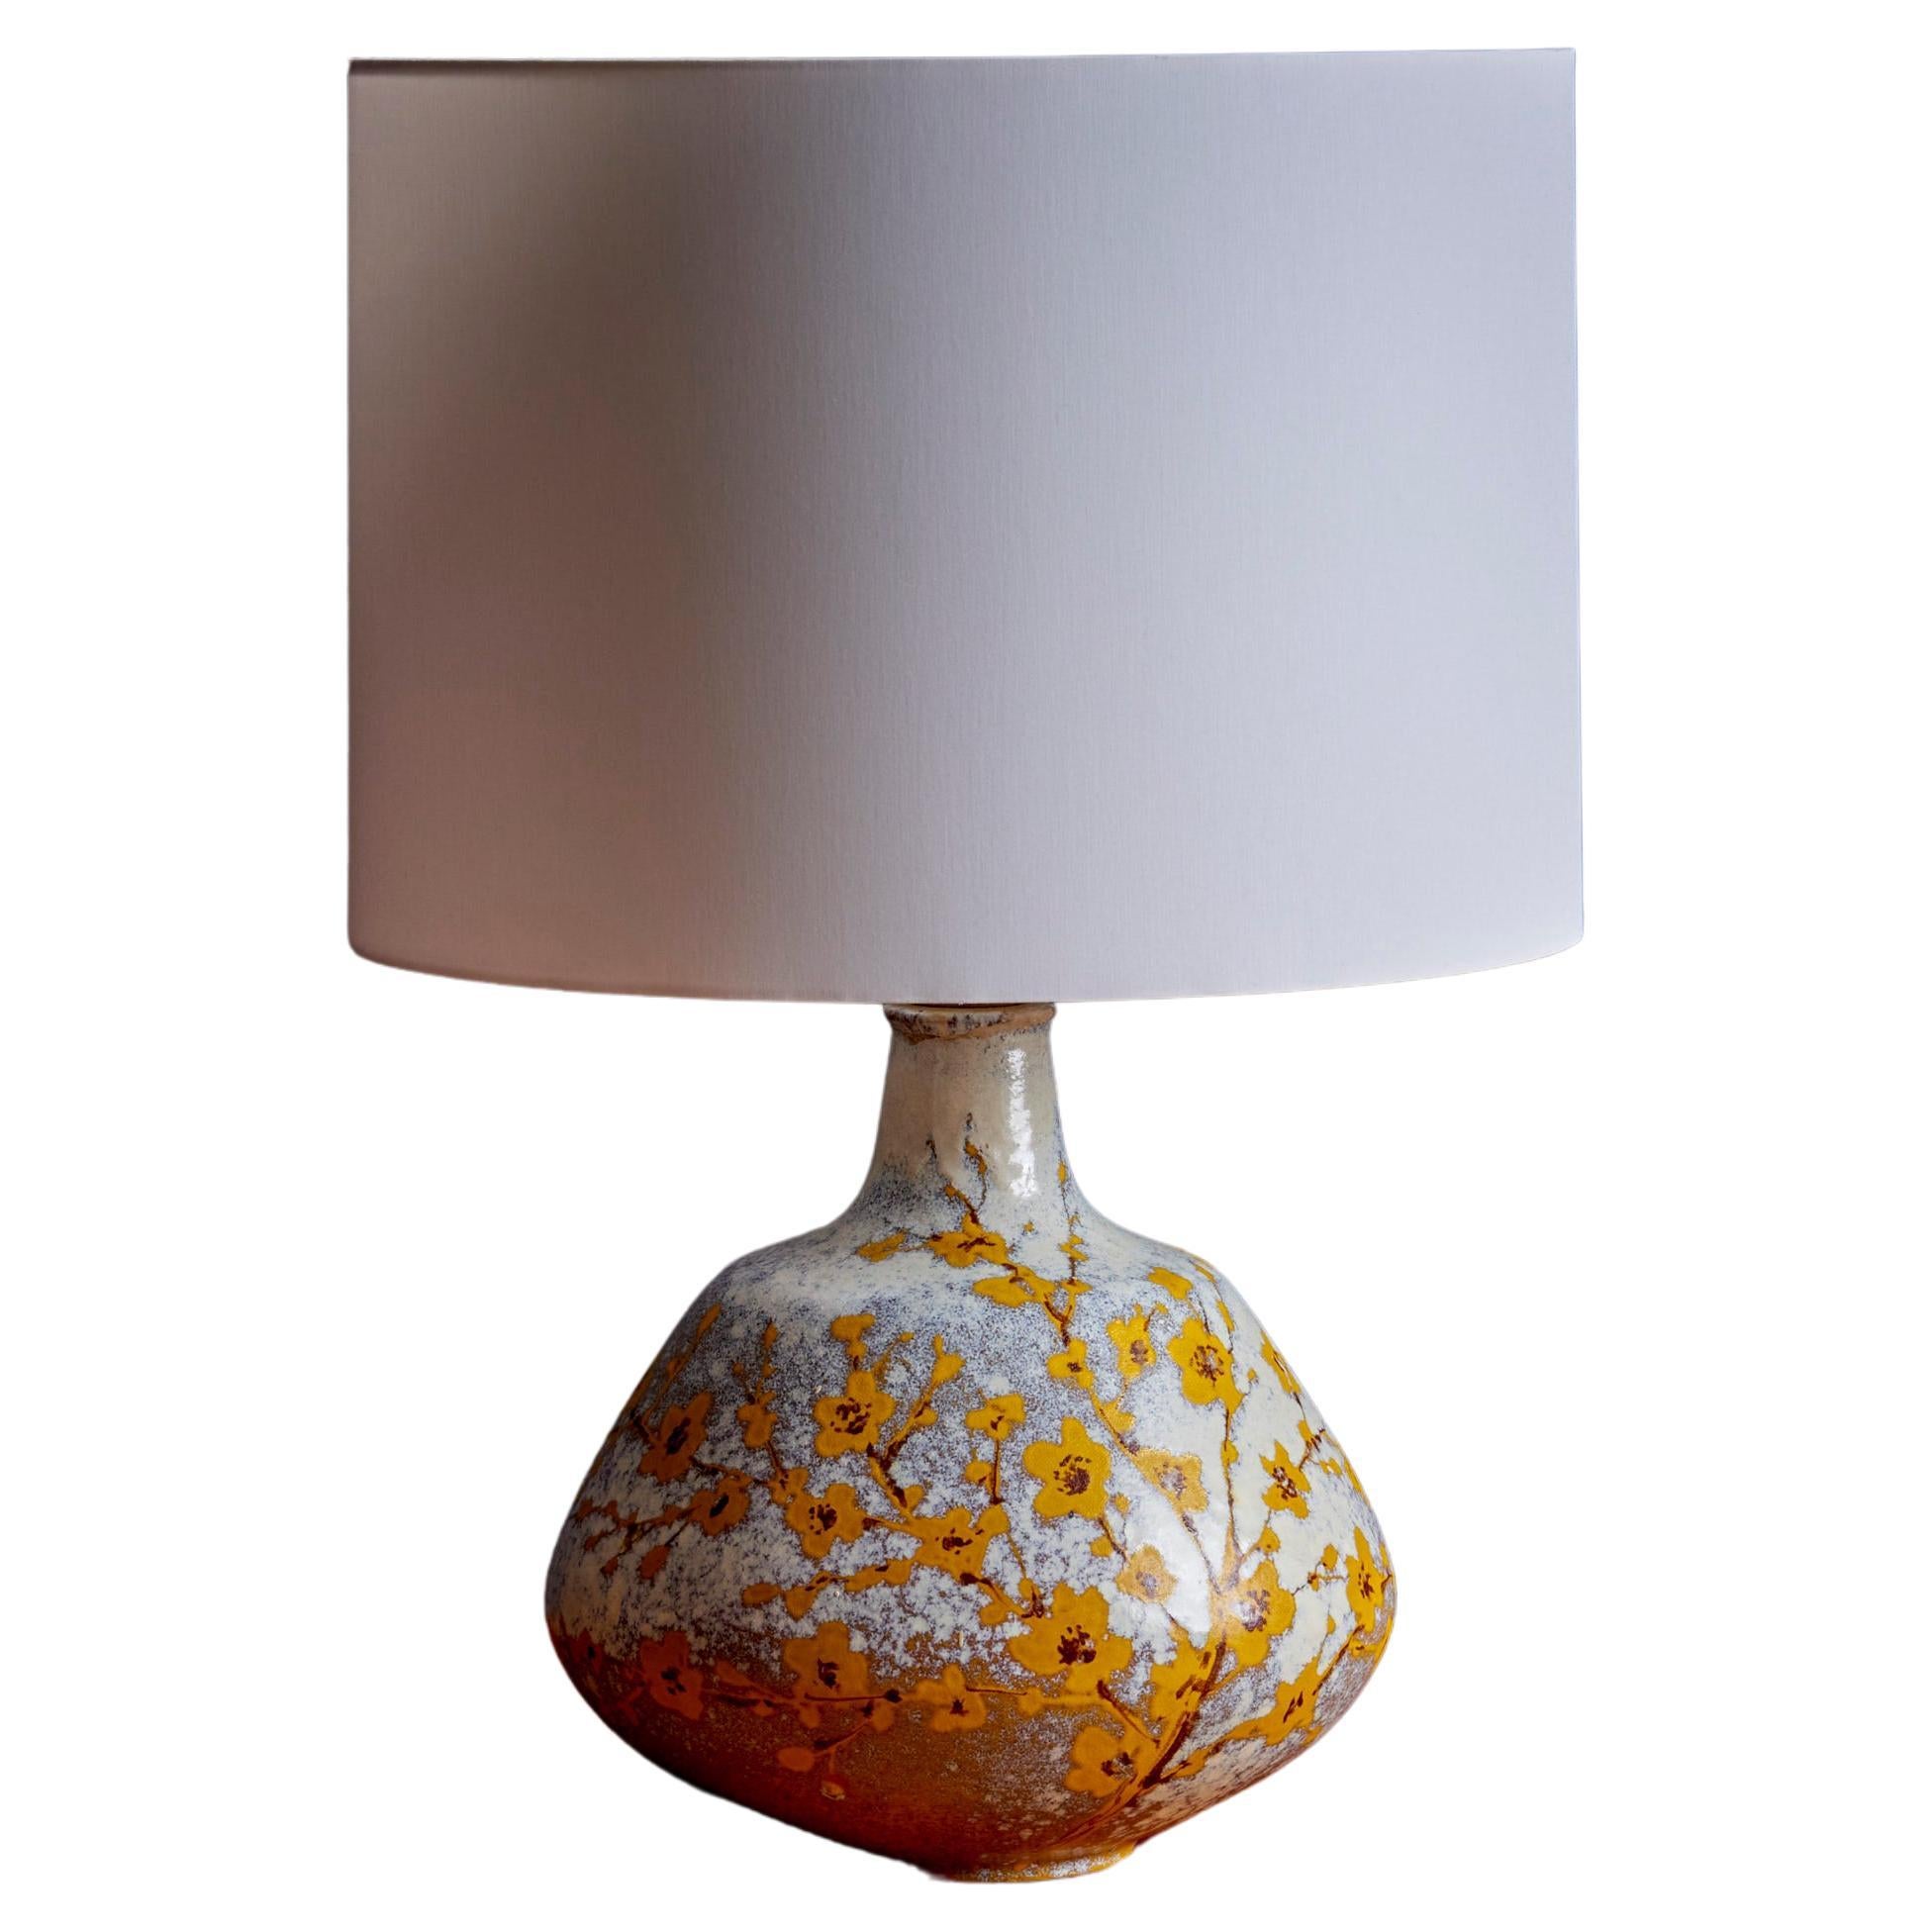 Italian Table Lamp in grey and yellow with flowers, 1960s For Sale